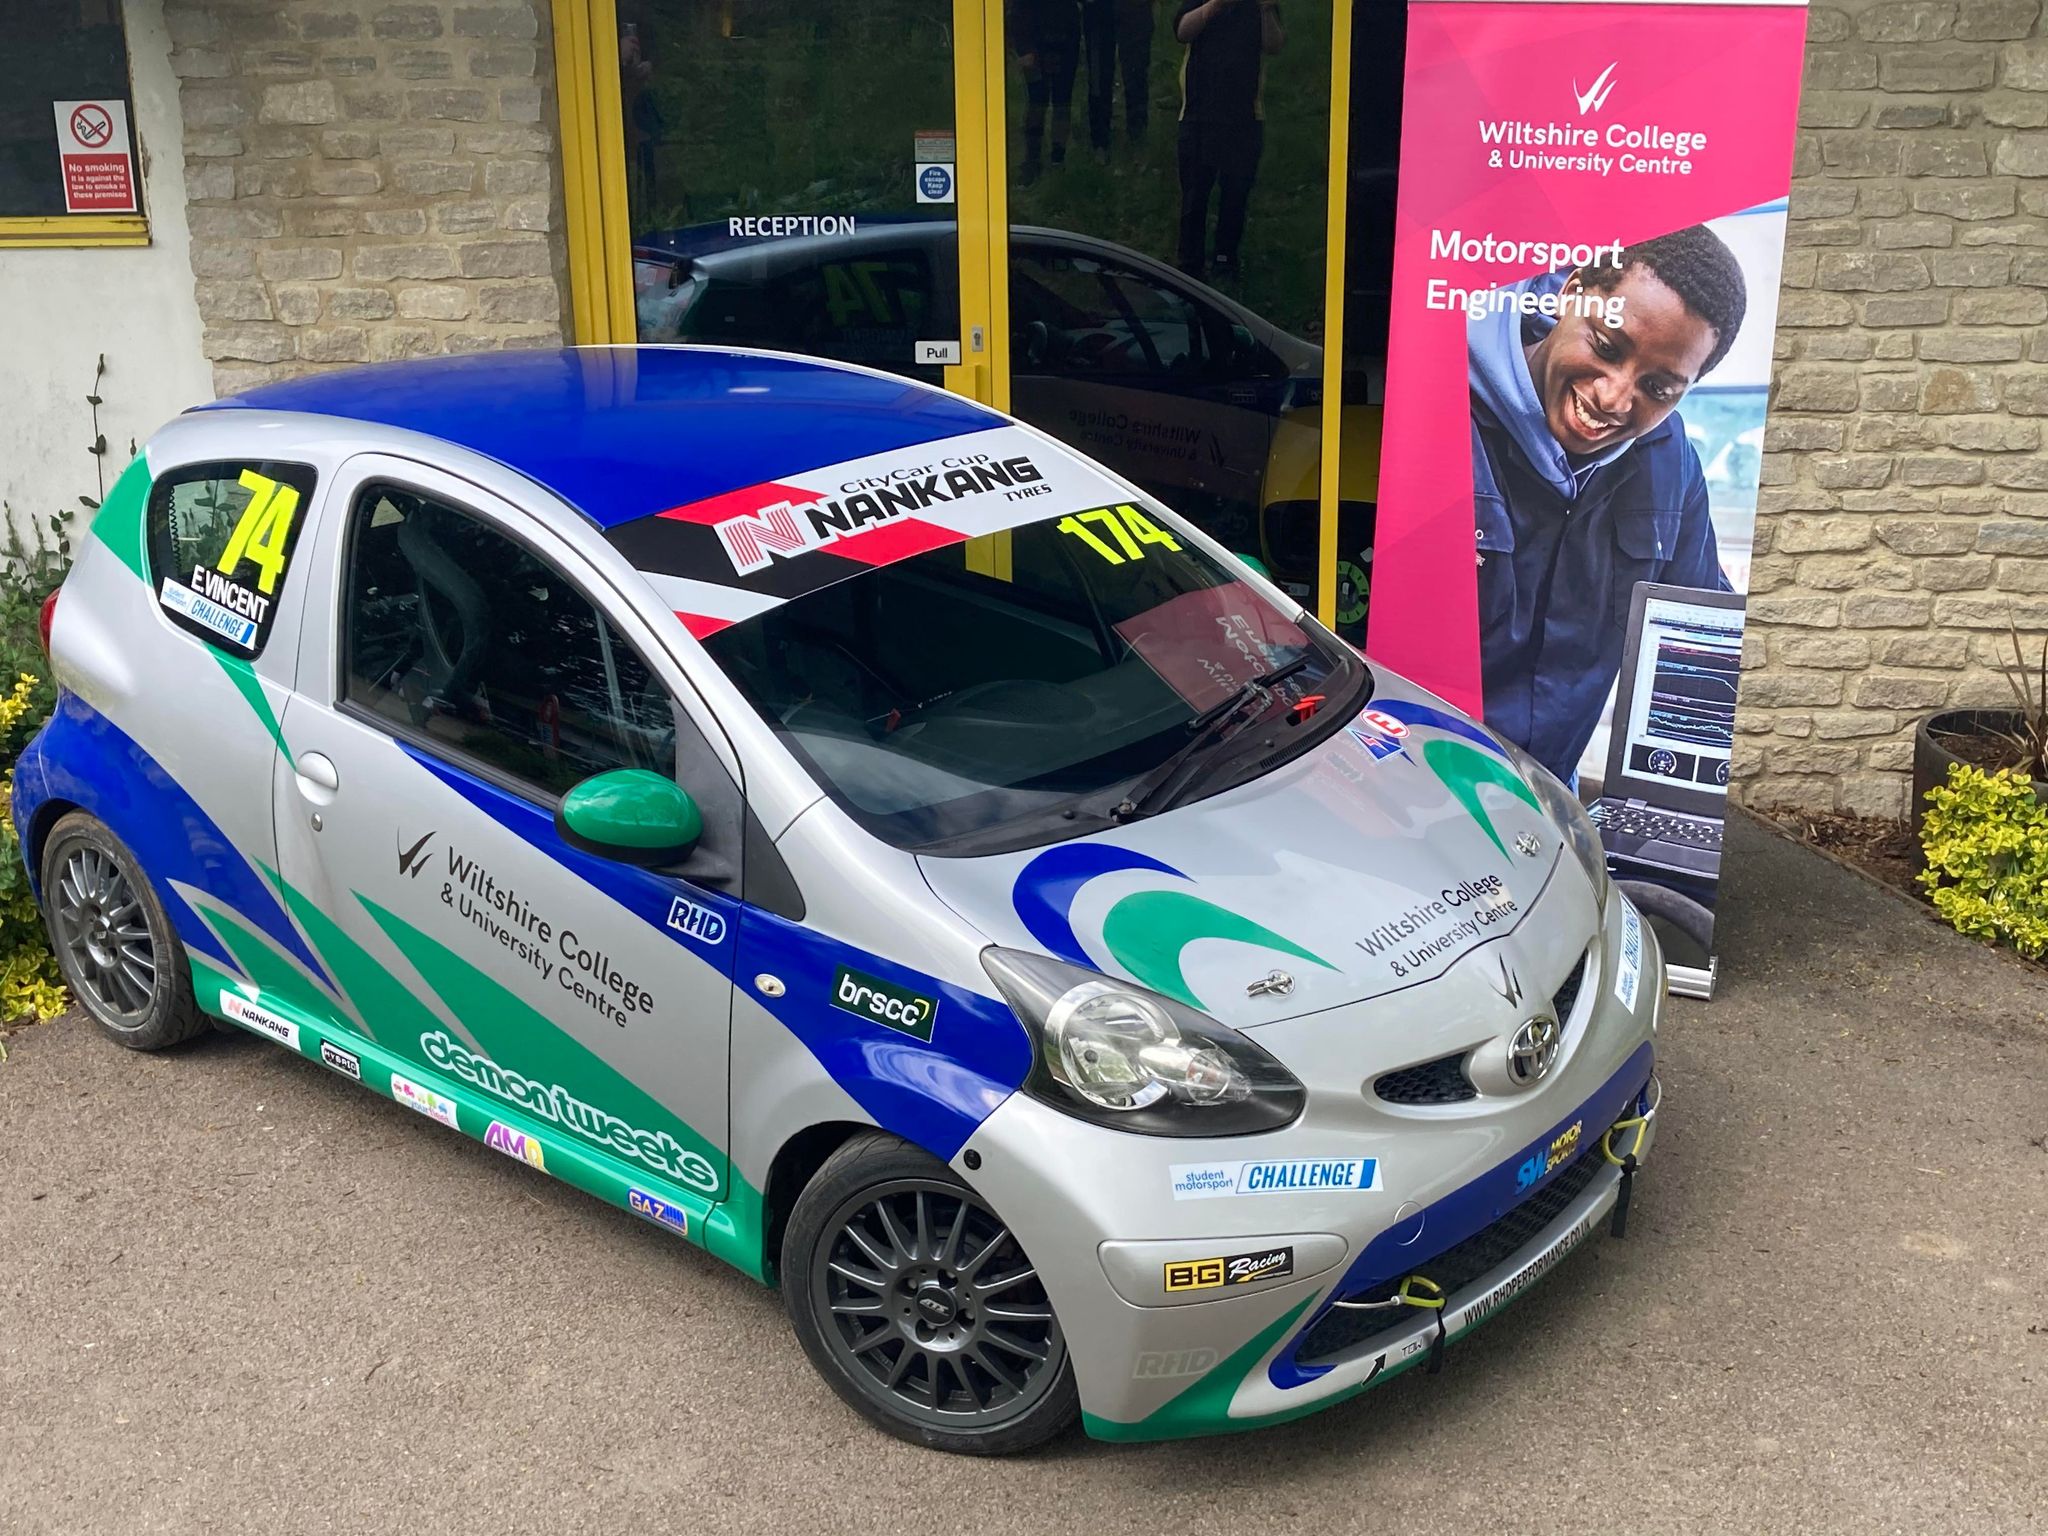 Wiltshire College Toyota Aygo outside their campus building at Castle Combe Race Circuit